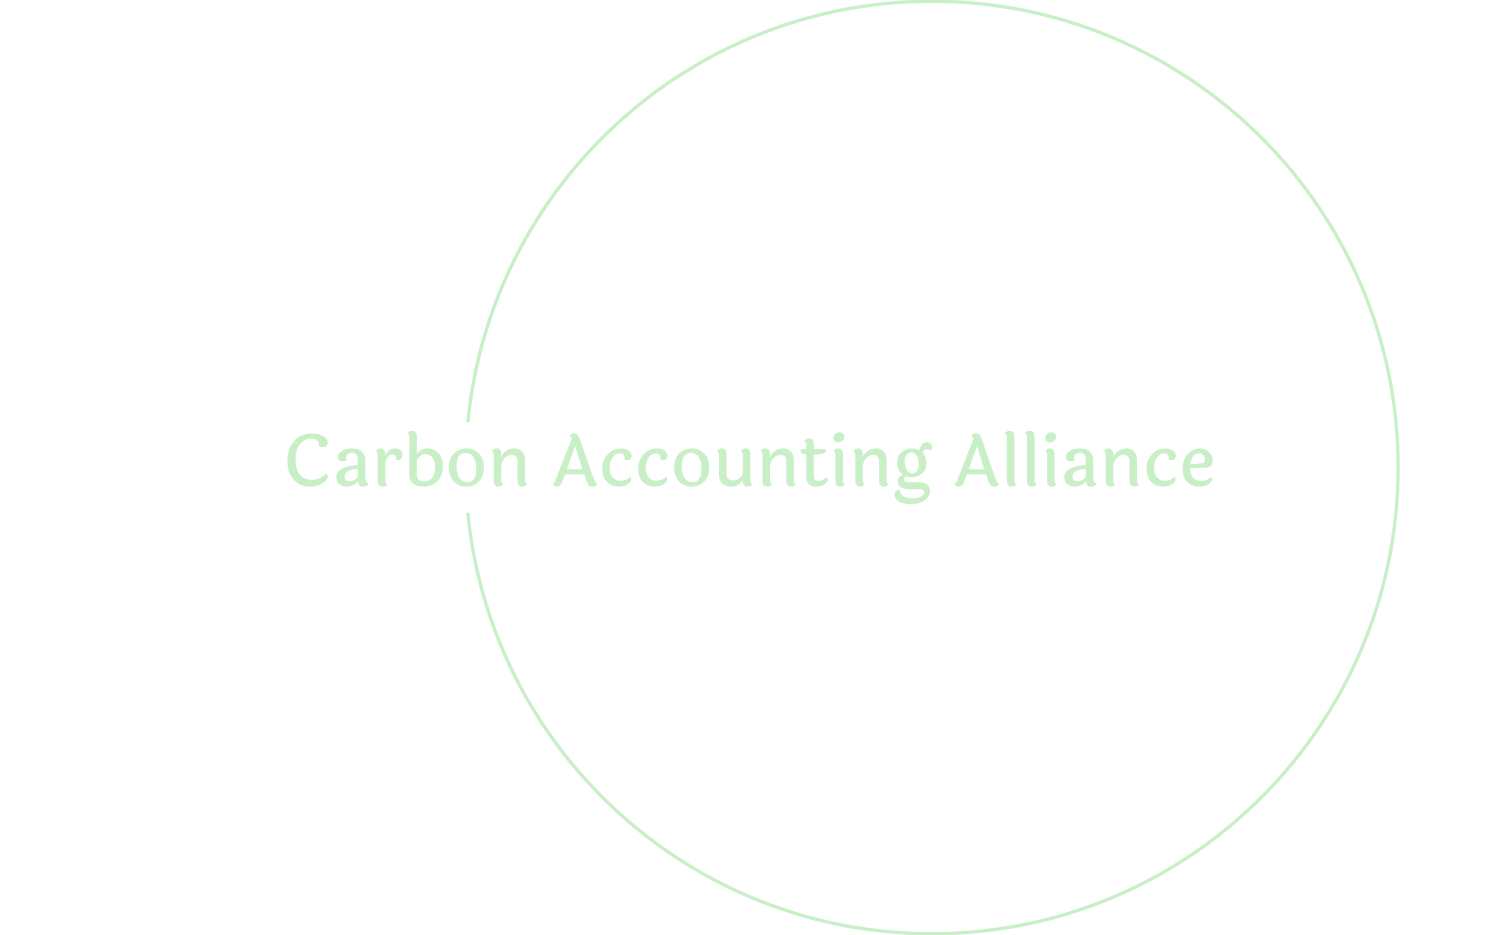 Carbon Accounting Alliance